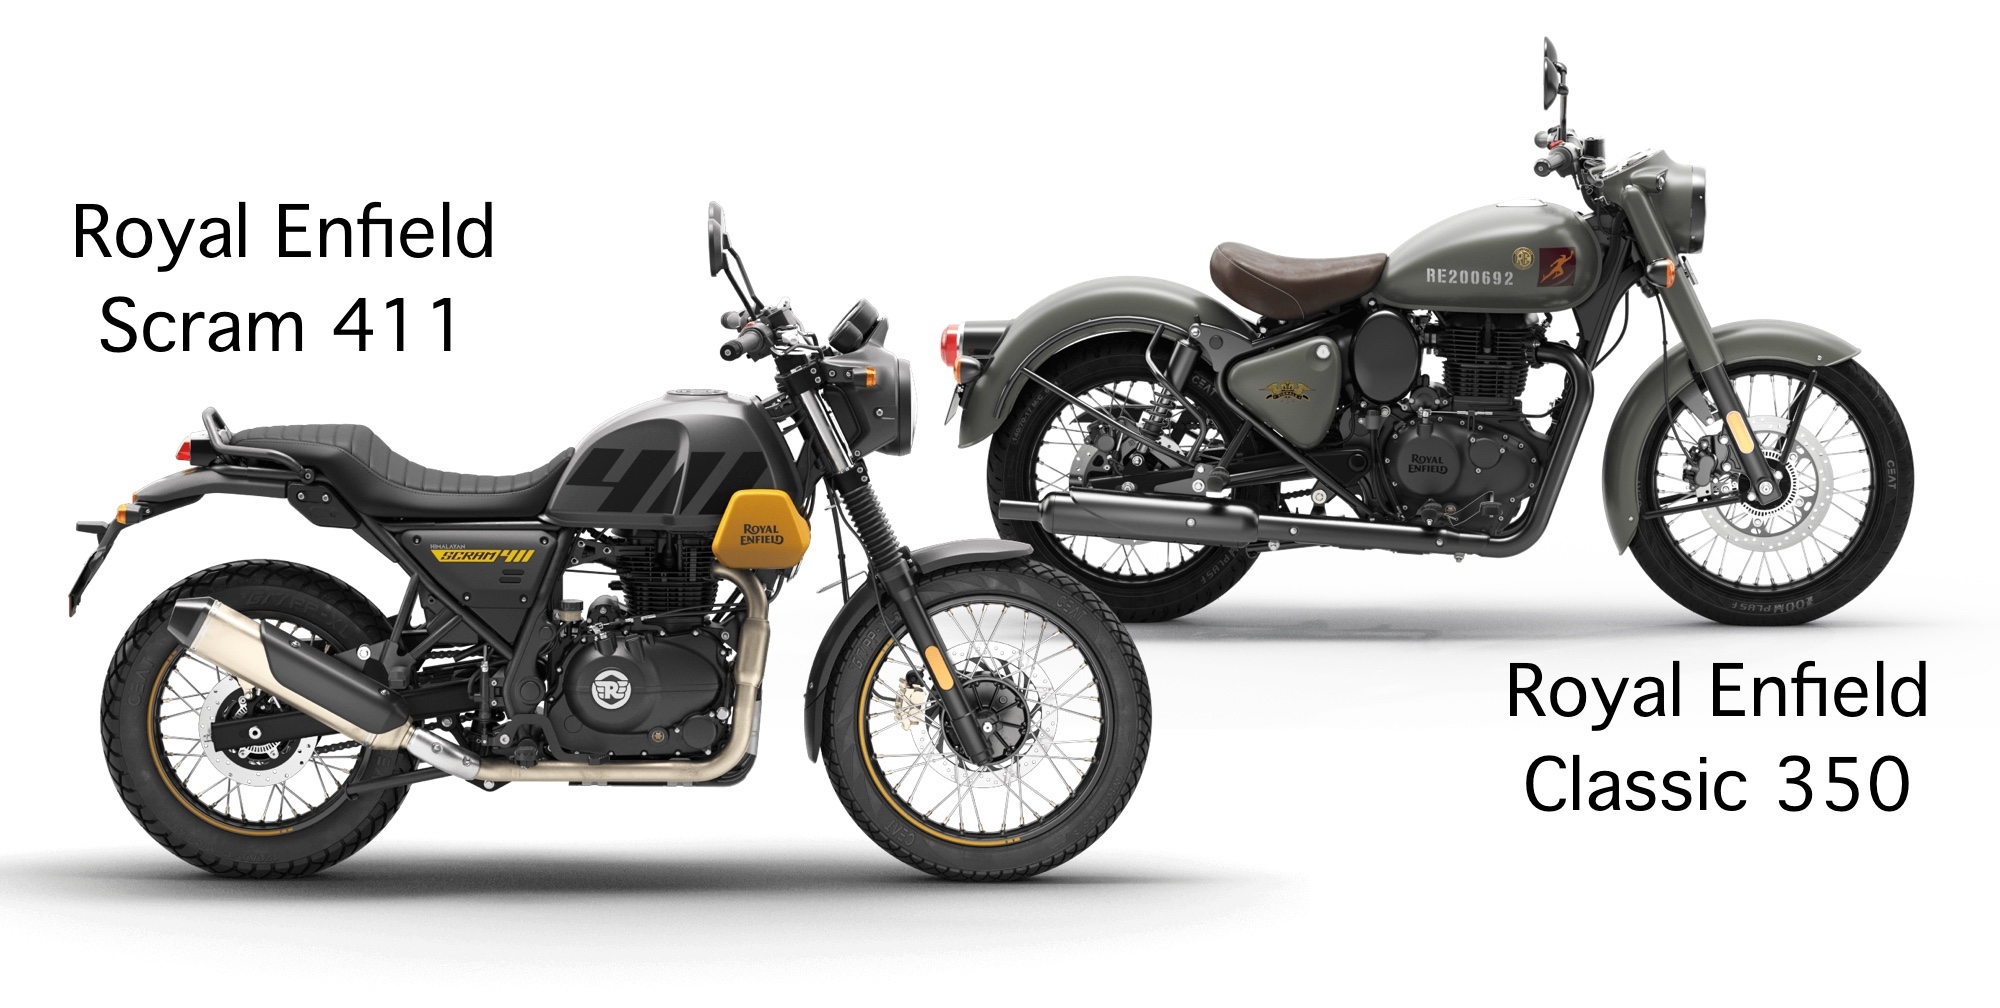 Two Royal Enfield motorcycles.